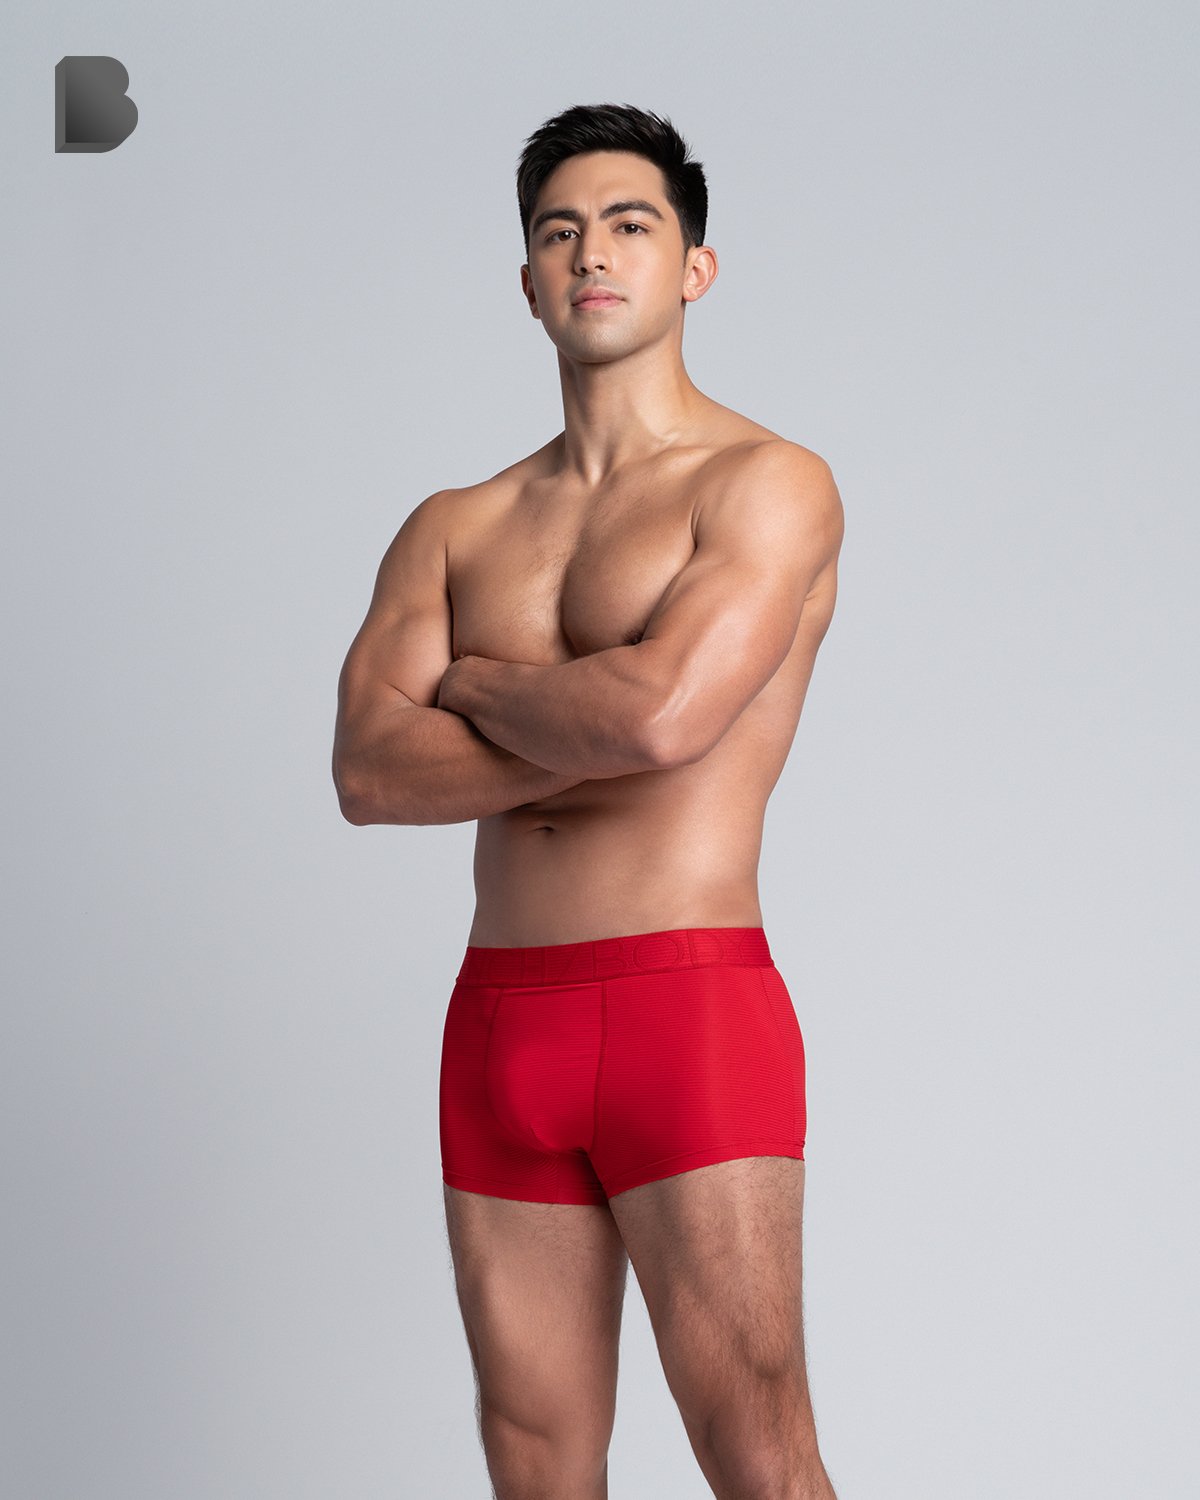 BENCH/ on X: Style and confidence are guaranteed with this Bench Body  Hipster Boxer Brief! It's very durable and comfortable, which makes it a  great choice for your day-to-day activities.🍃⛱️ Buy Official